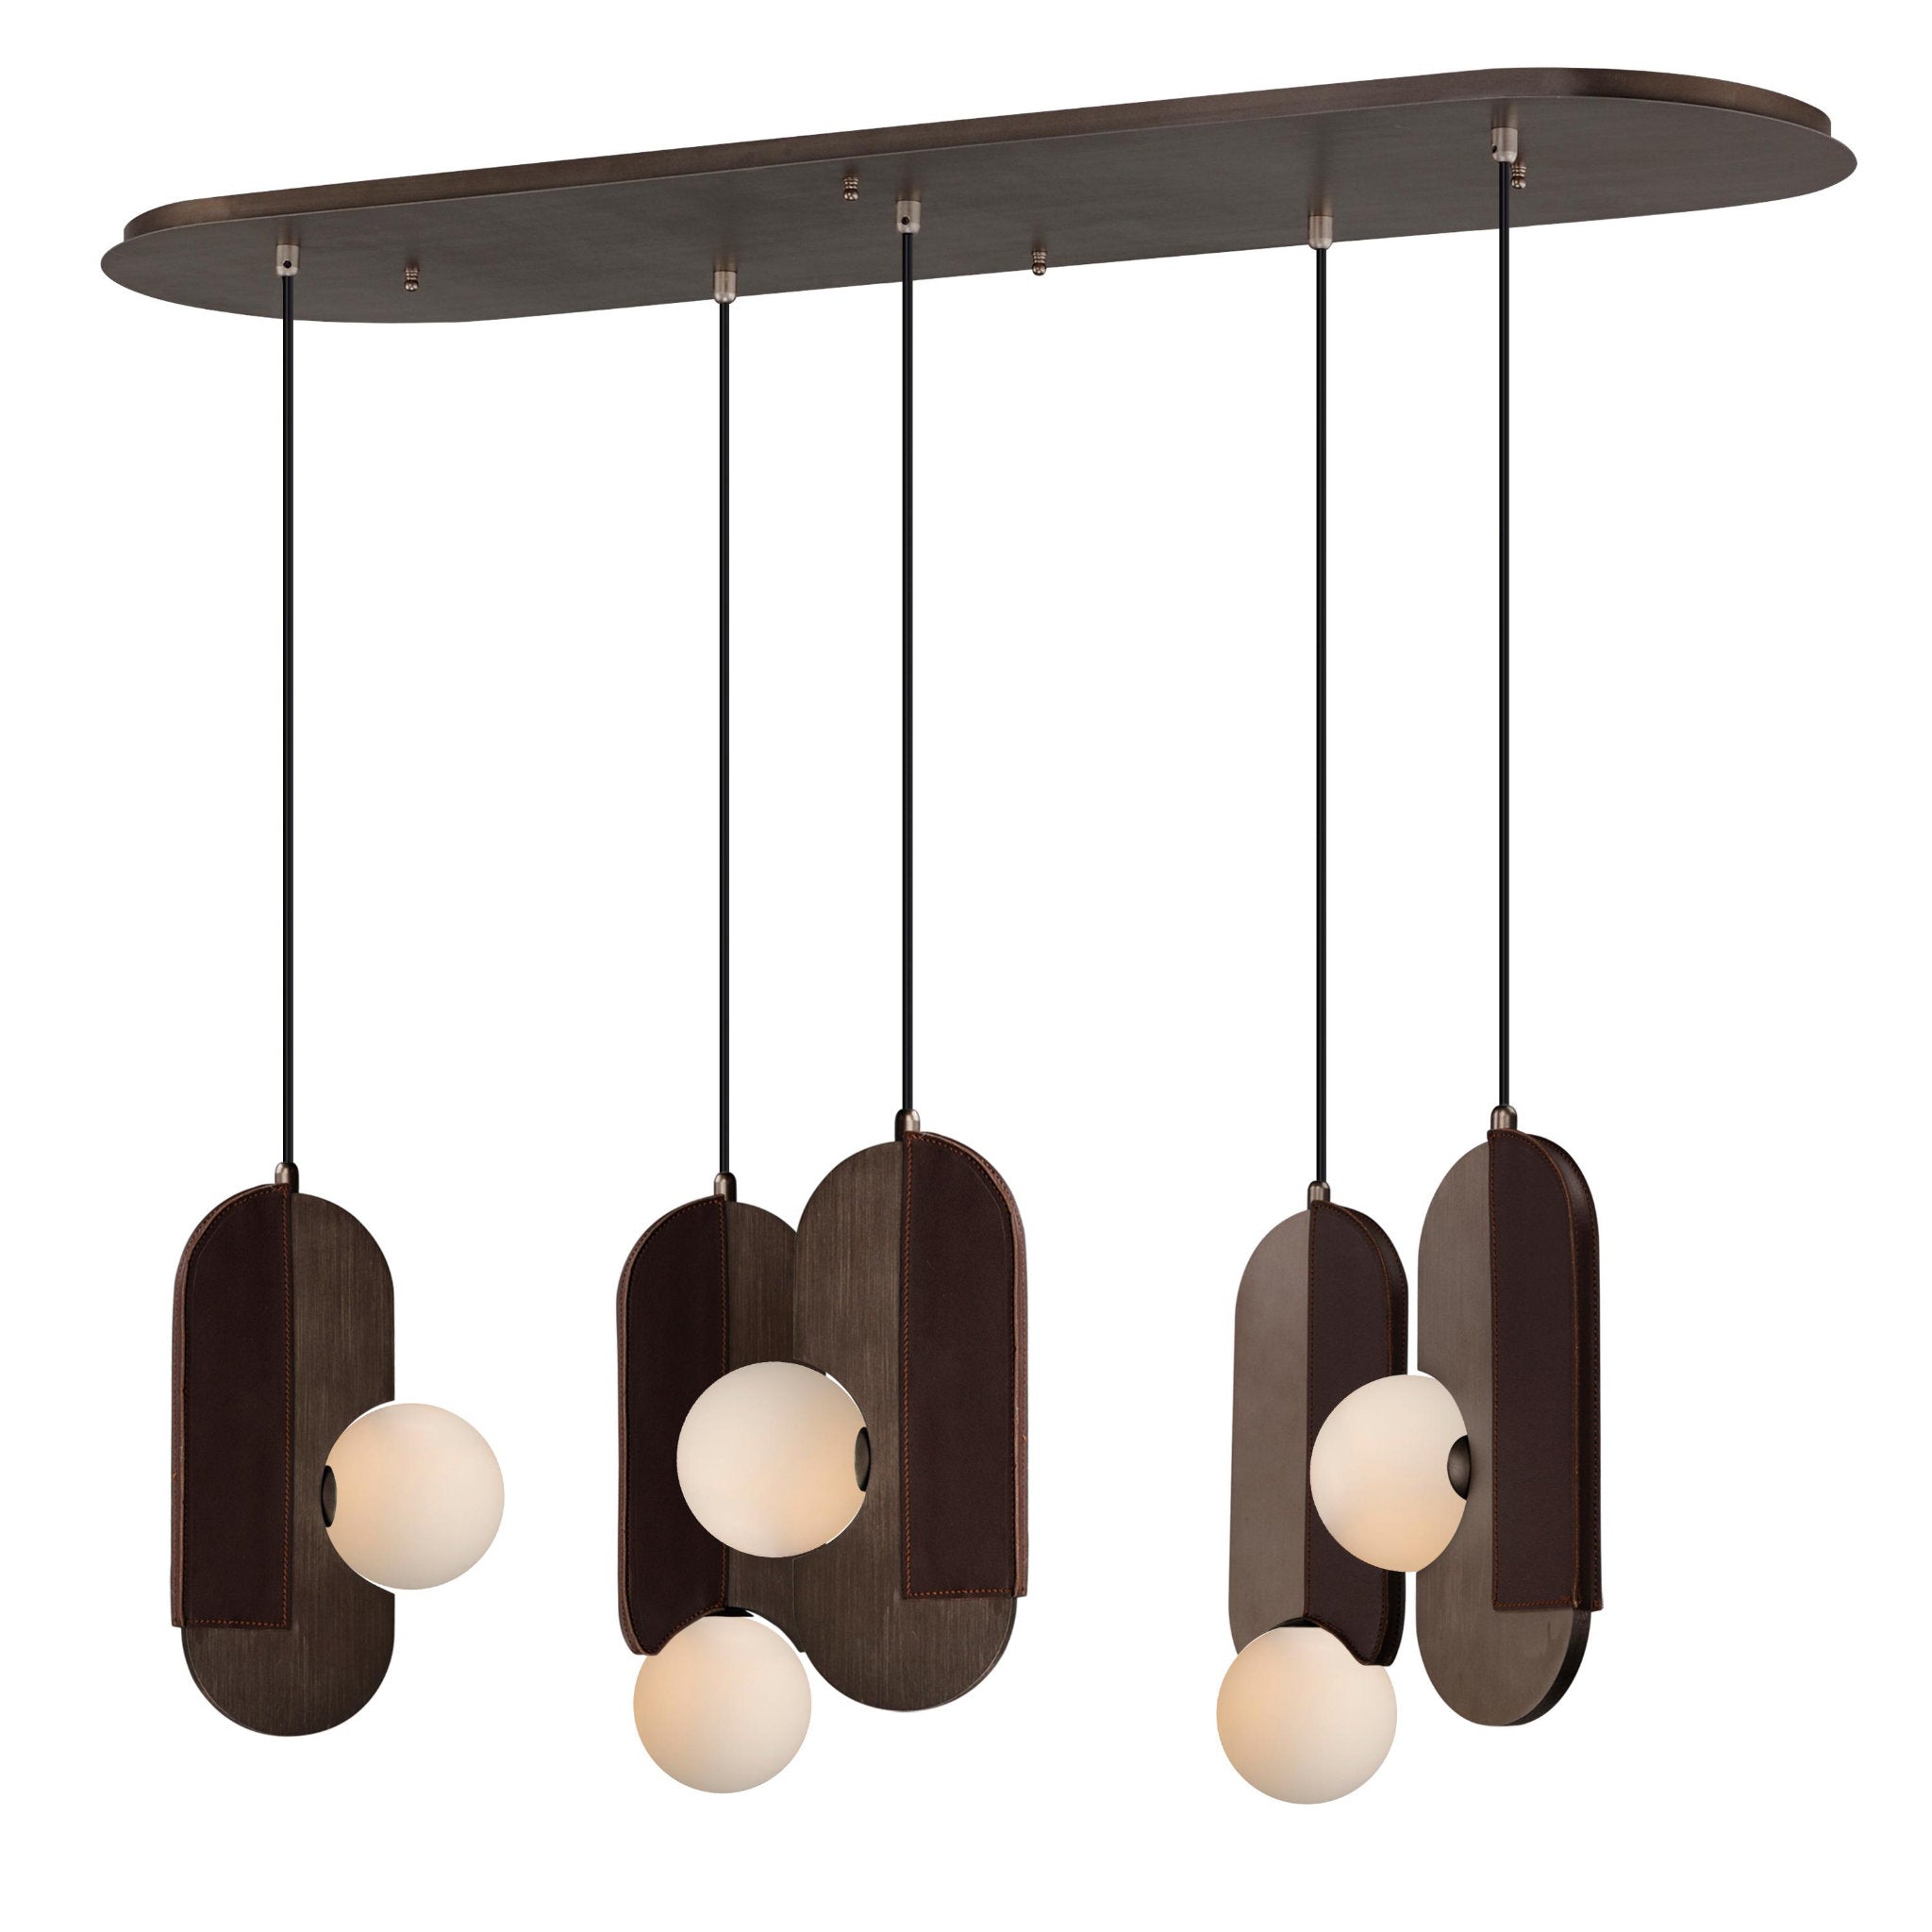 Studio M SM24605BBZ Stitched 5-Light Pendant in Brushed Bronze by Nina Magon